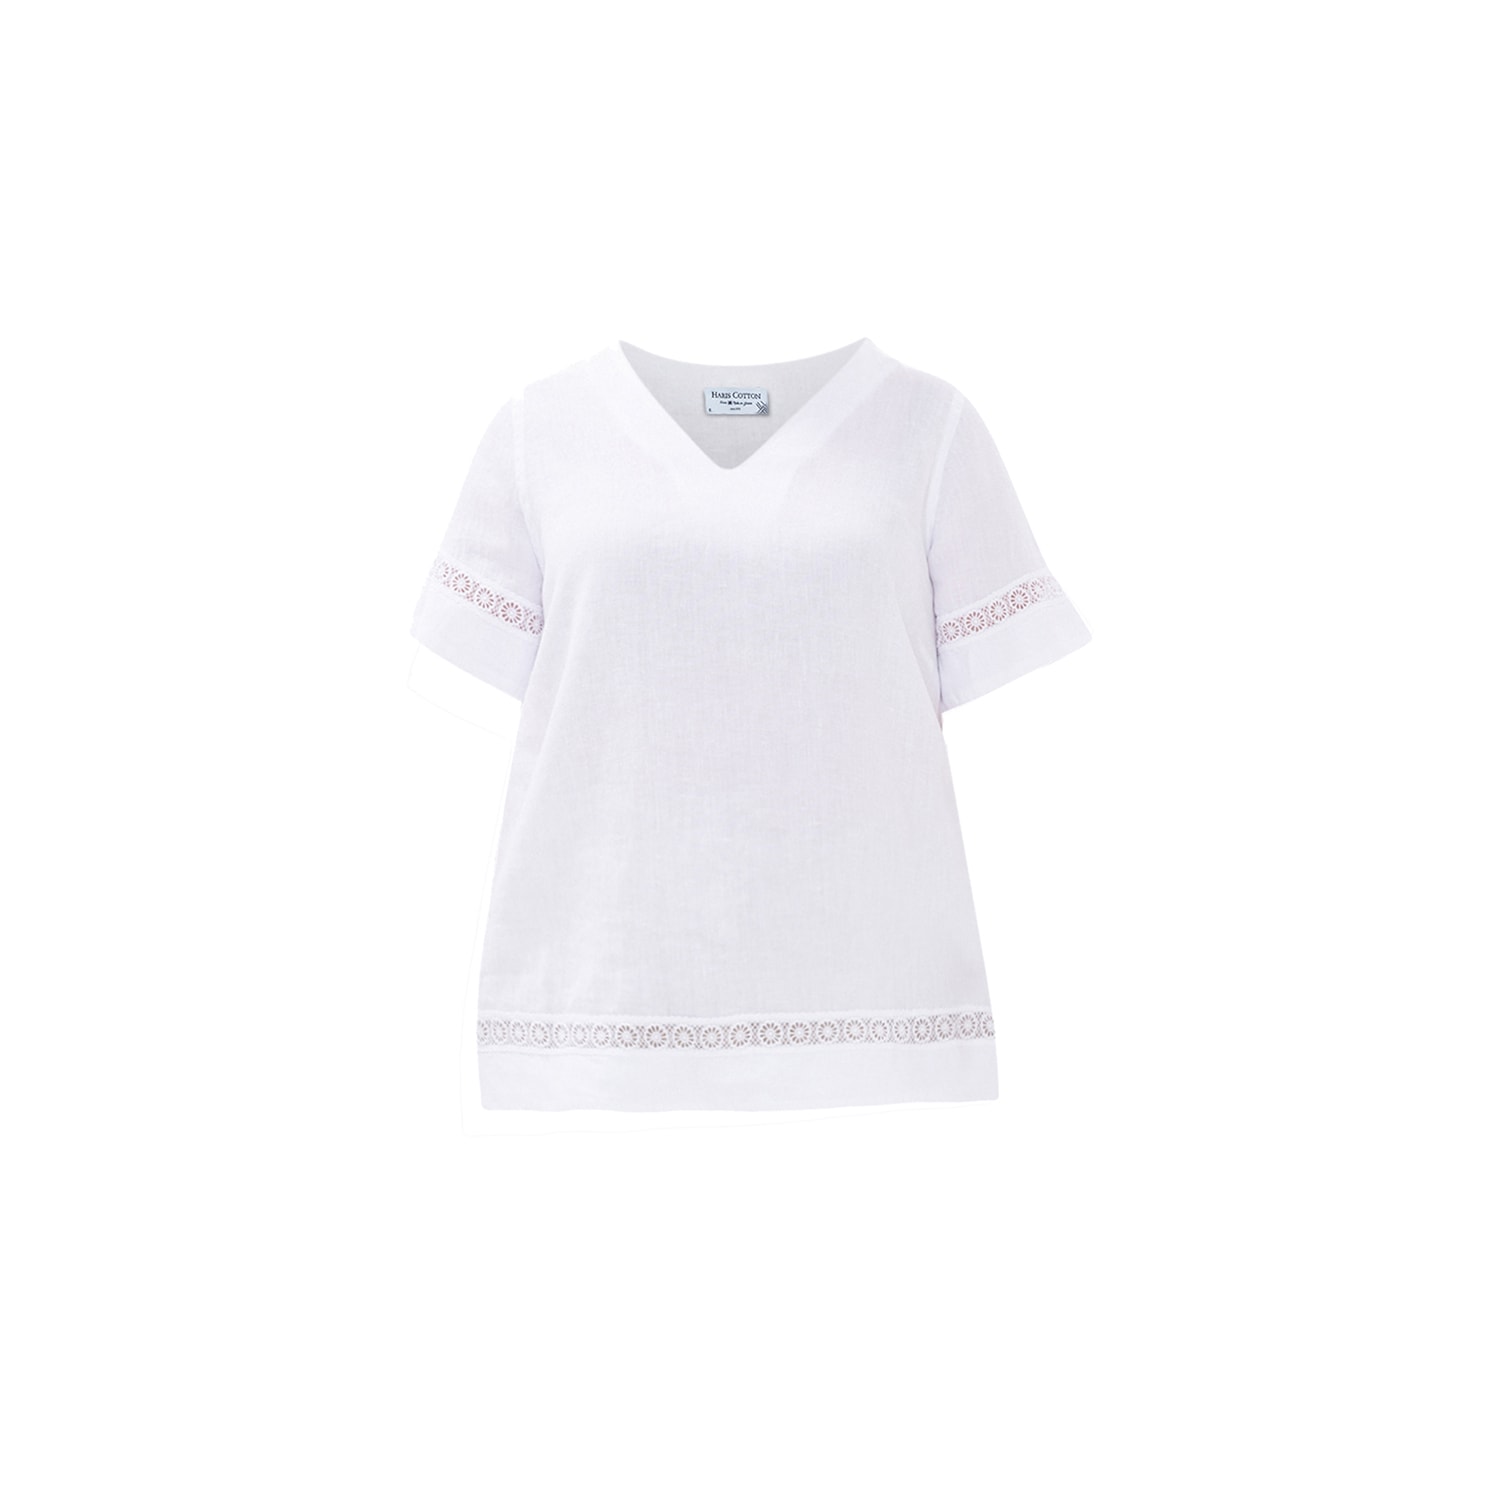 Women’s Guipure Lace Insert Linen Blouse With V Neck And Short Sleeve - White Extra Small Haris Cotton